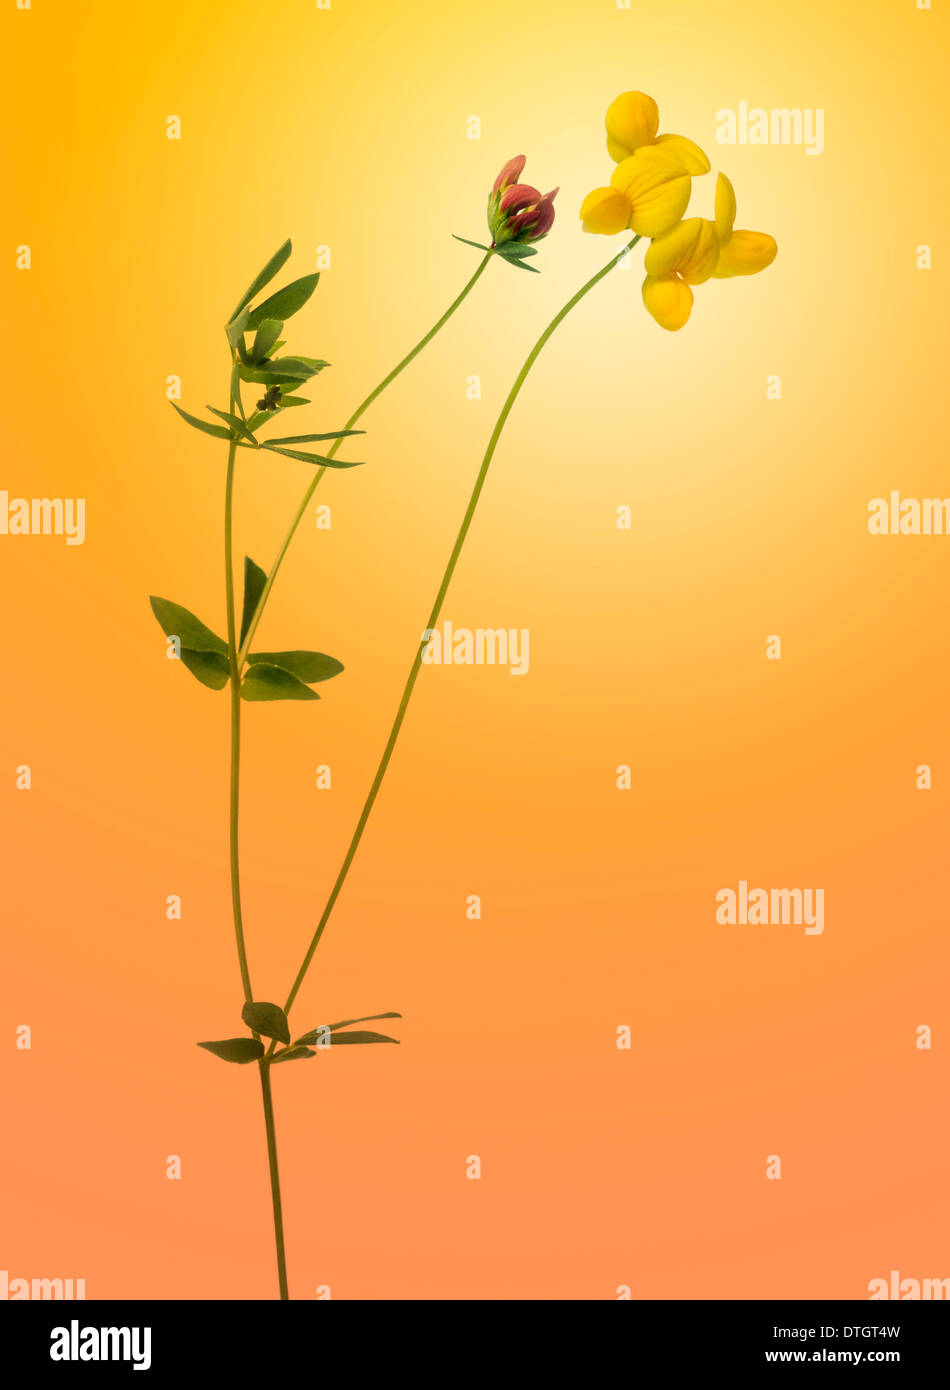 Flowers isolated on a orange gradient background Stock Photo